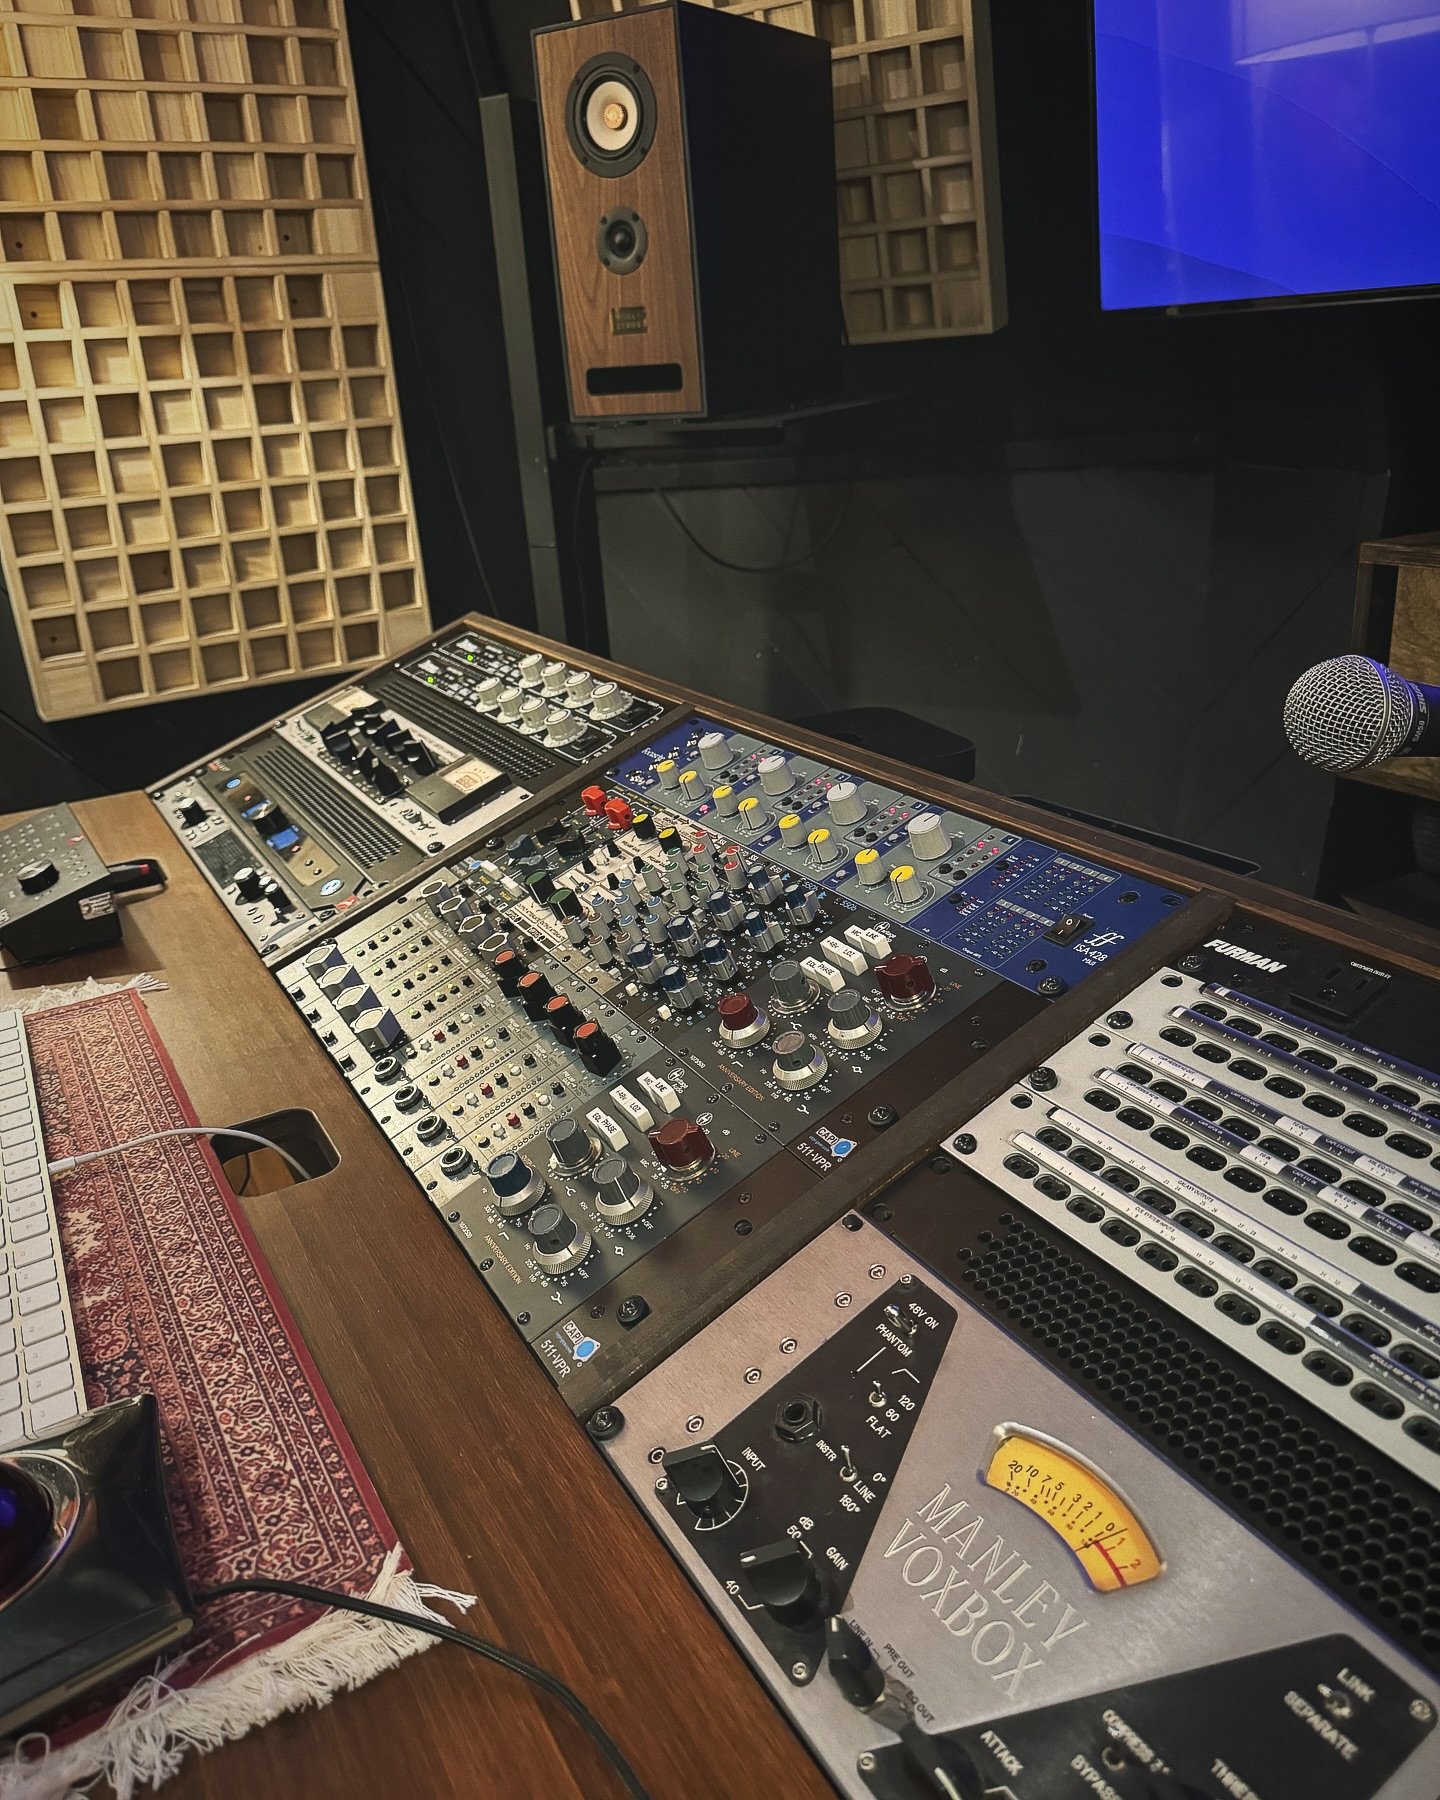 Studio B grows! I love this room so much, snd now it is capable of full tracking sessions. It packs a big punch. Come take it for a spin! 🚀
*
@pentavarit @spatialdesks @capigear @chandlerlimited @empiricallabs @wavedistro @manleylabs @heartechnologi